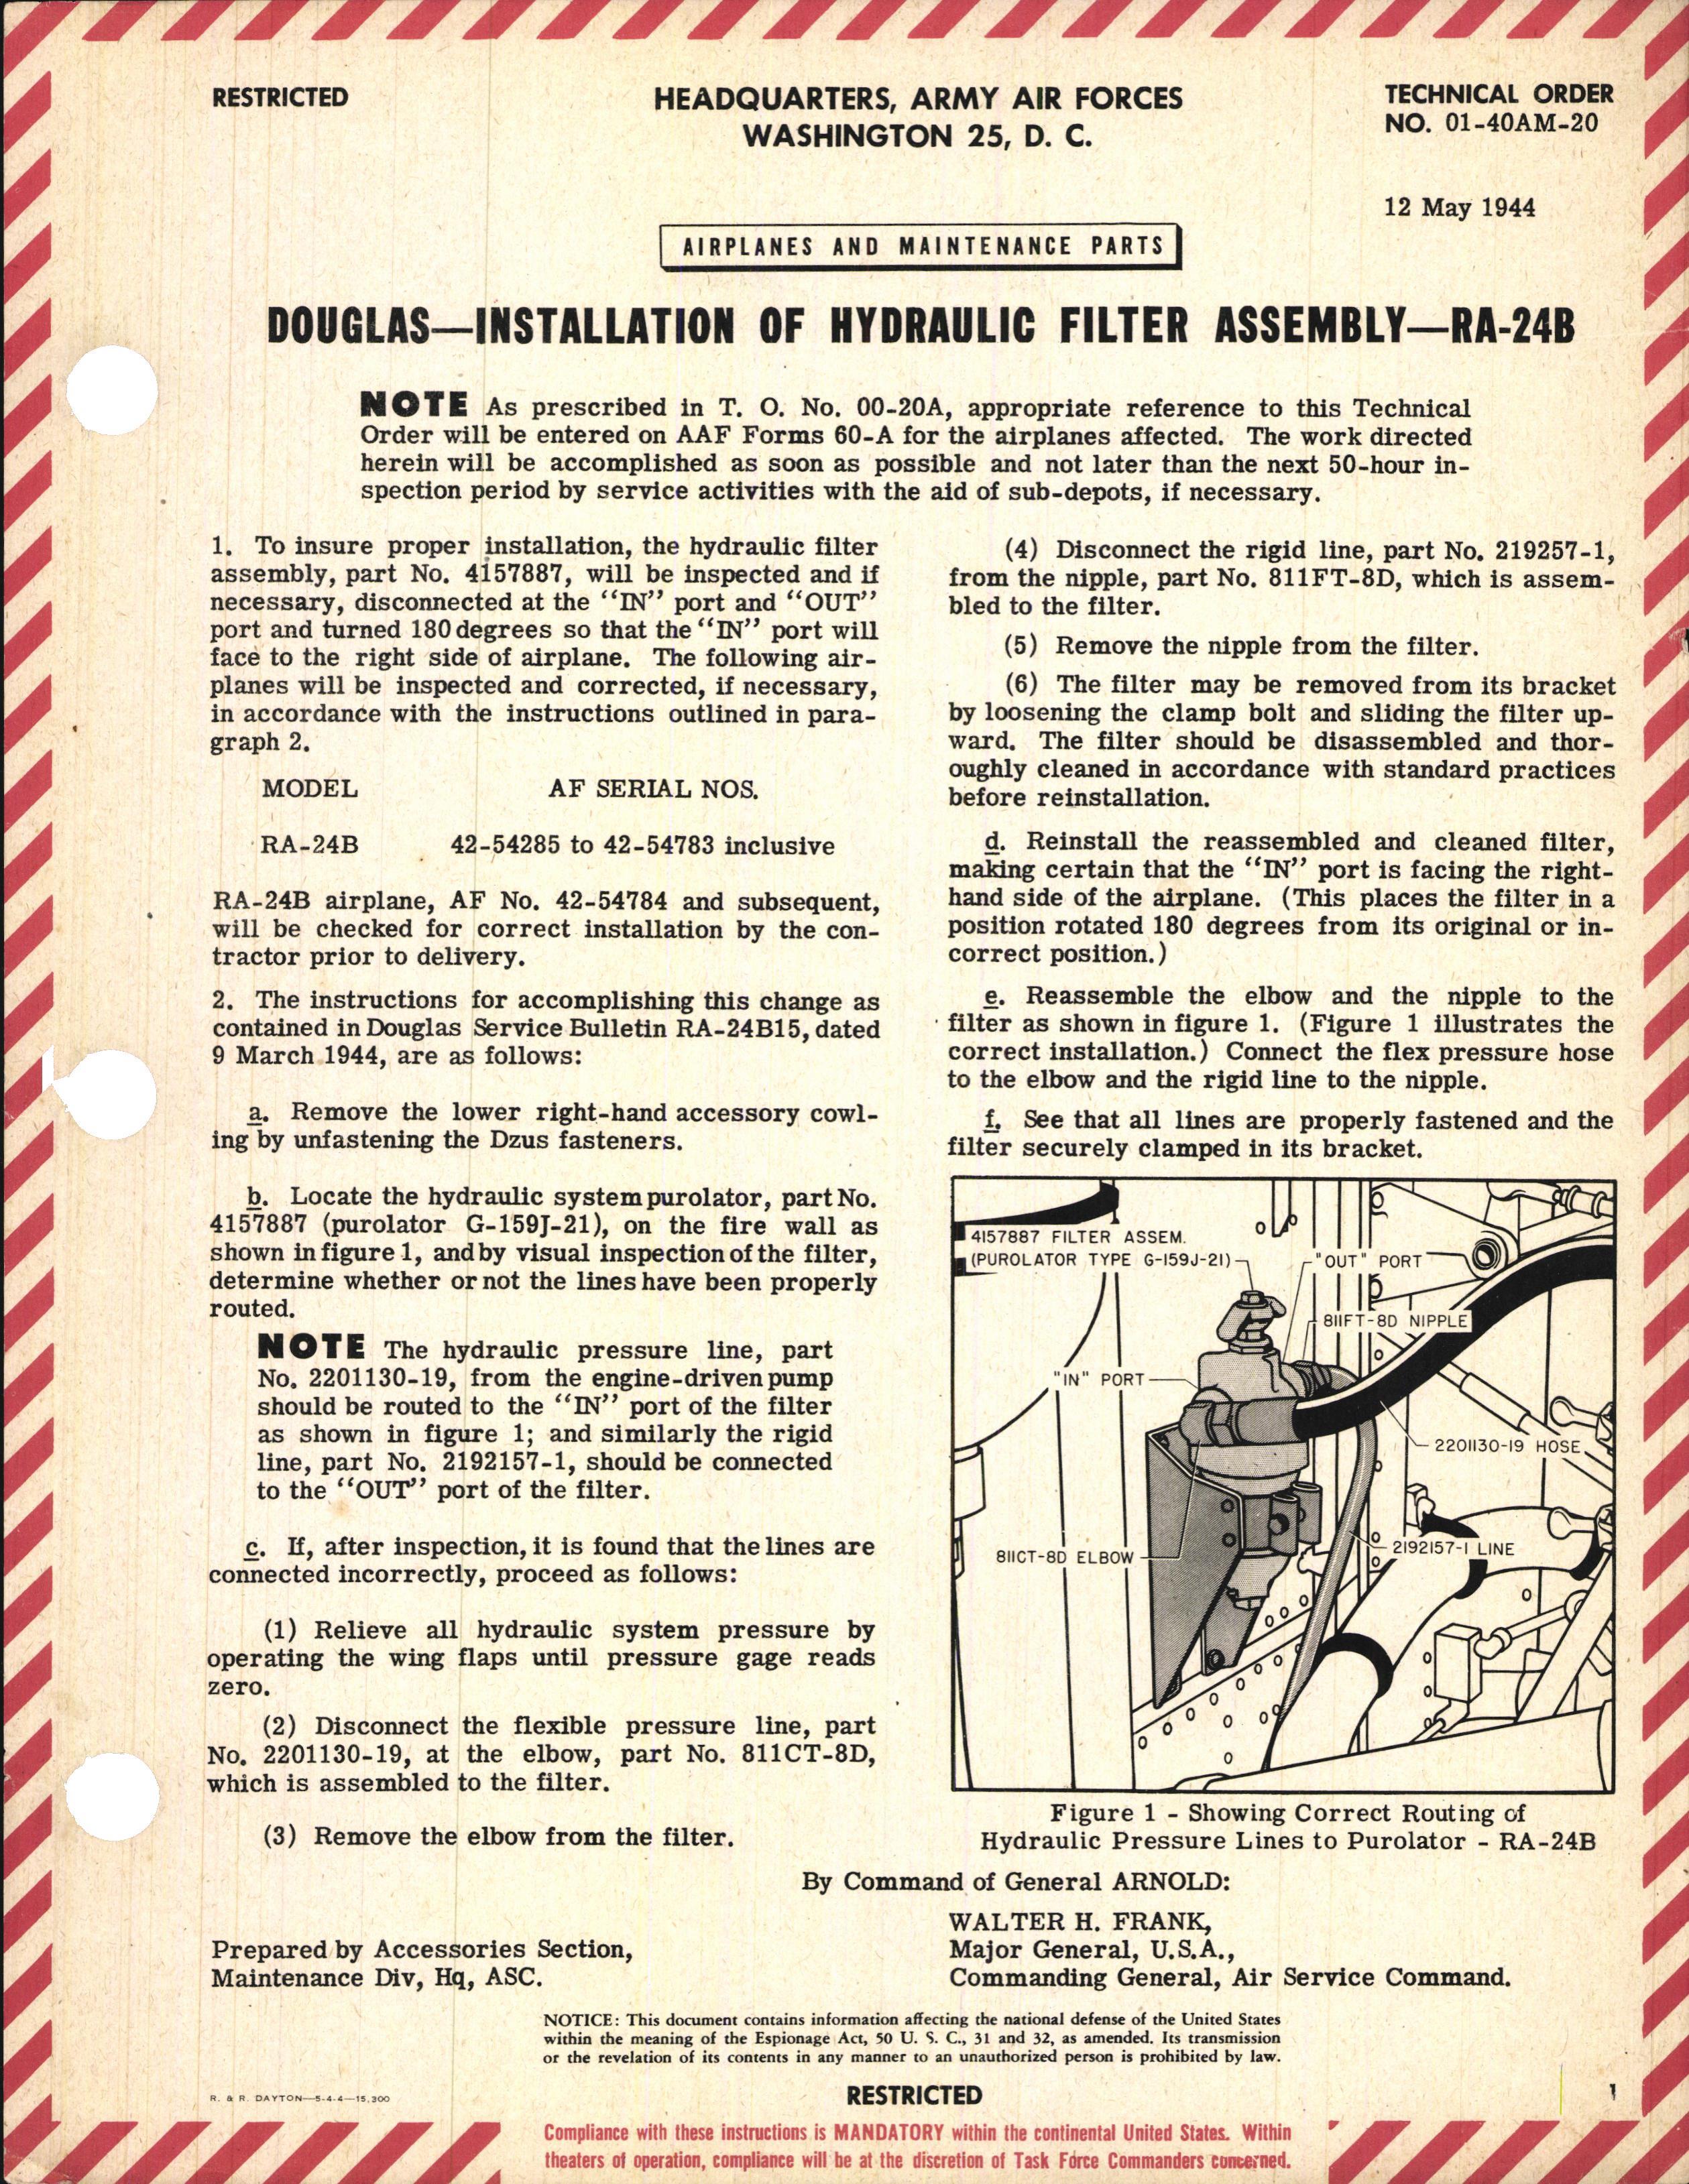 Sample page 1 from AirCorps Library document: Installation of Hydraulic Filter Assembly for RA-24B